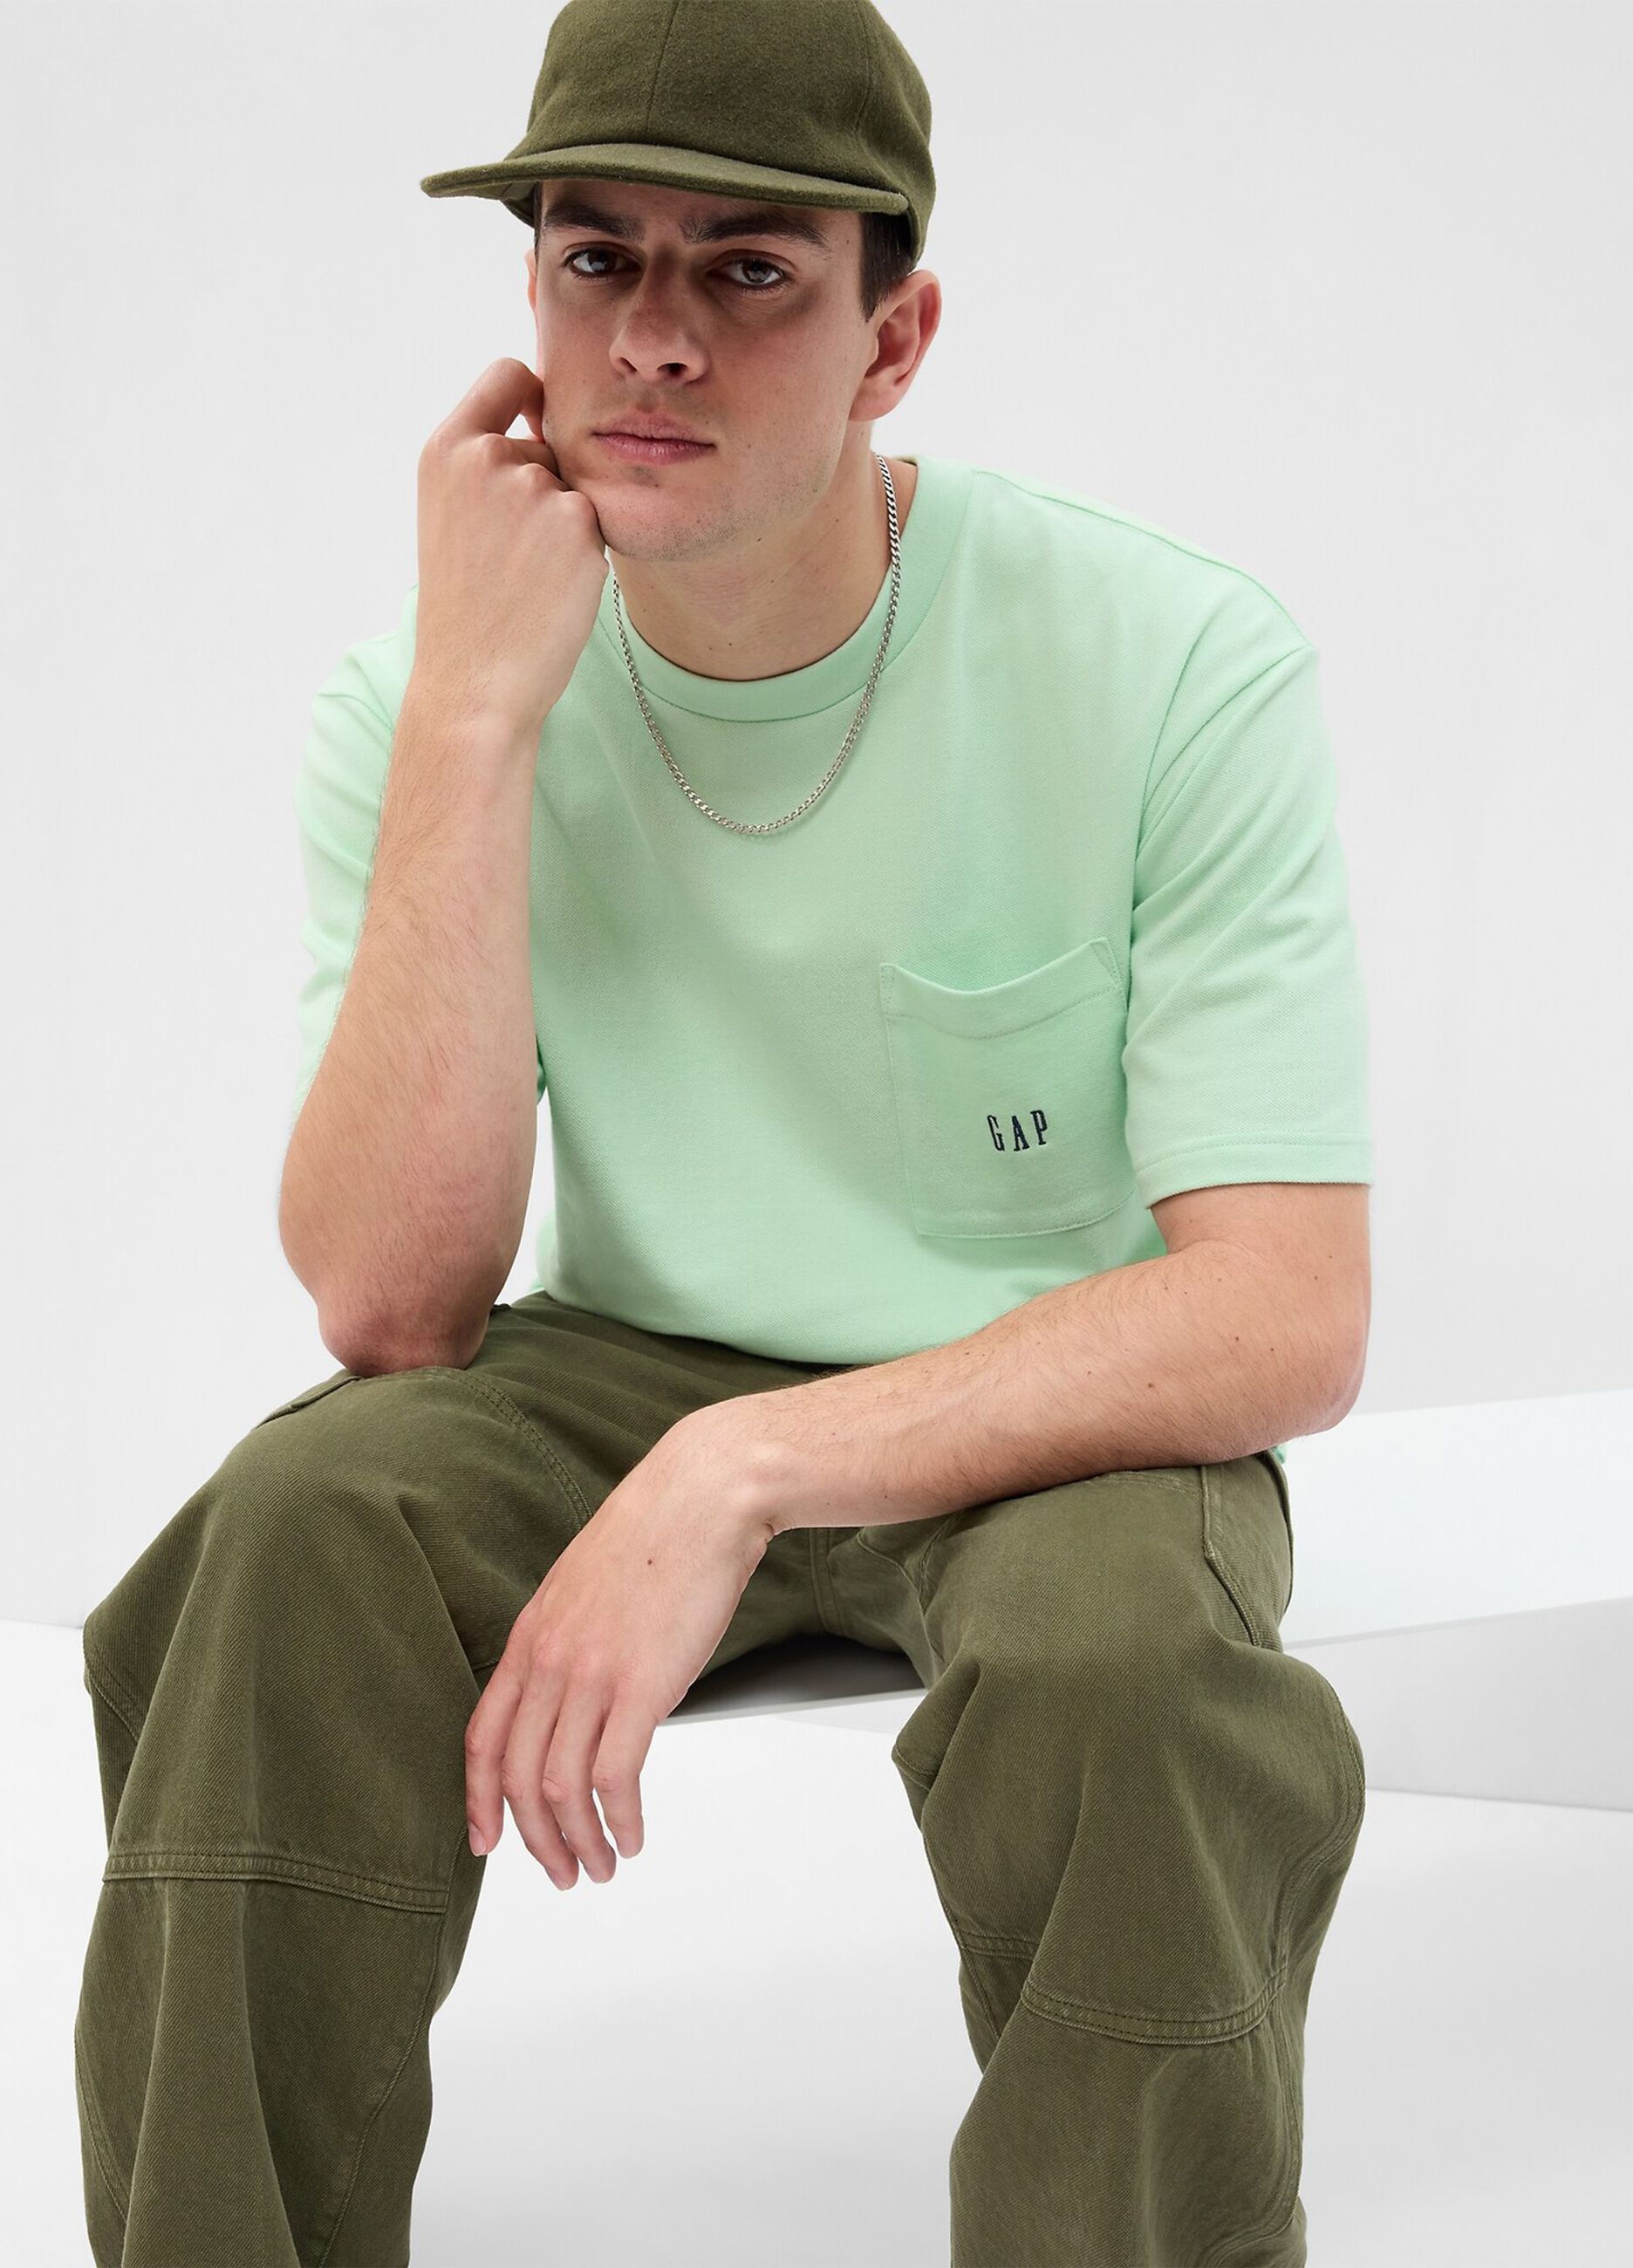 Cotton T-shirt with pocket and logo embroidery